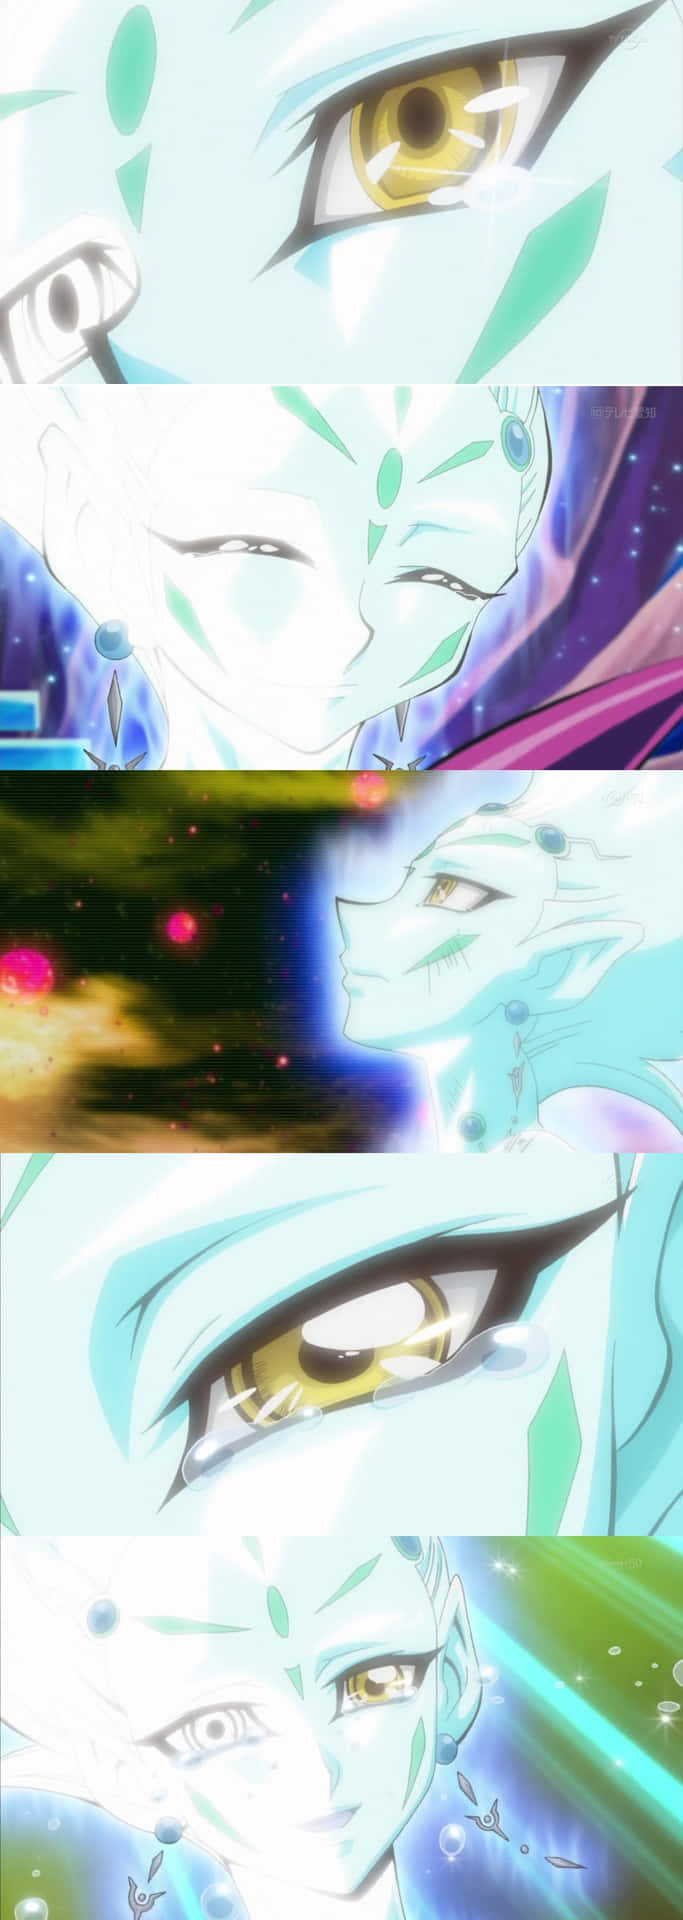 Yu-Gi-Oh! Astral and Yuma in an epic duel Wallpaper